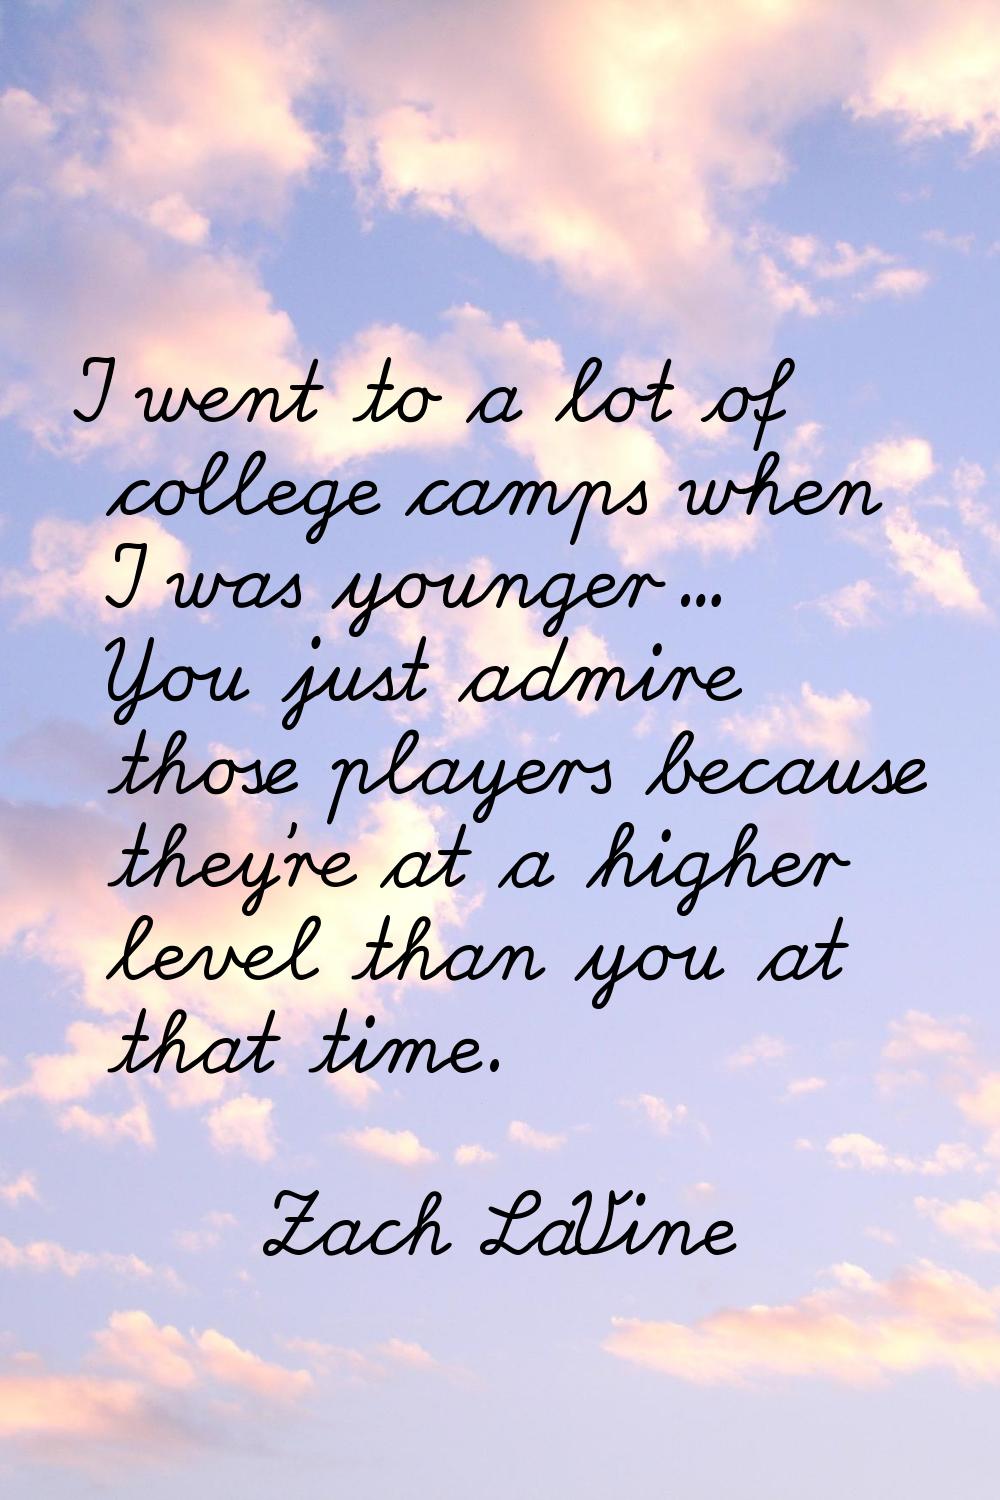 I went to a lot of college camps when I was younger... You just admire those players because they'r